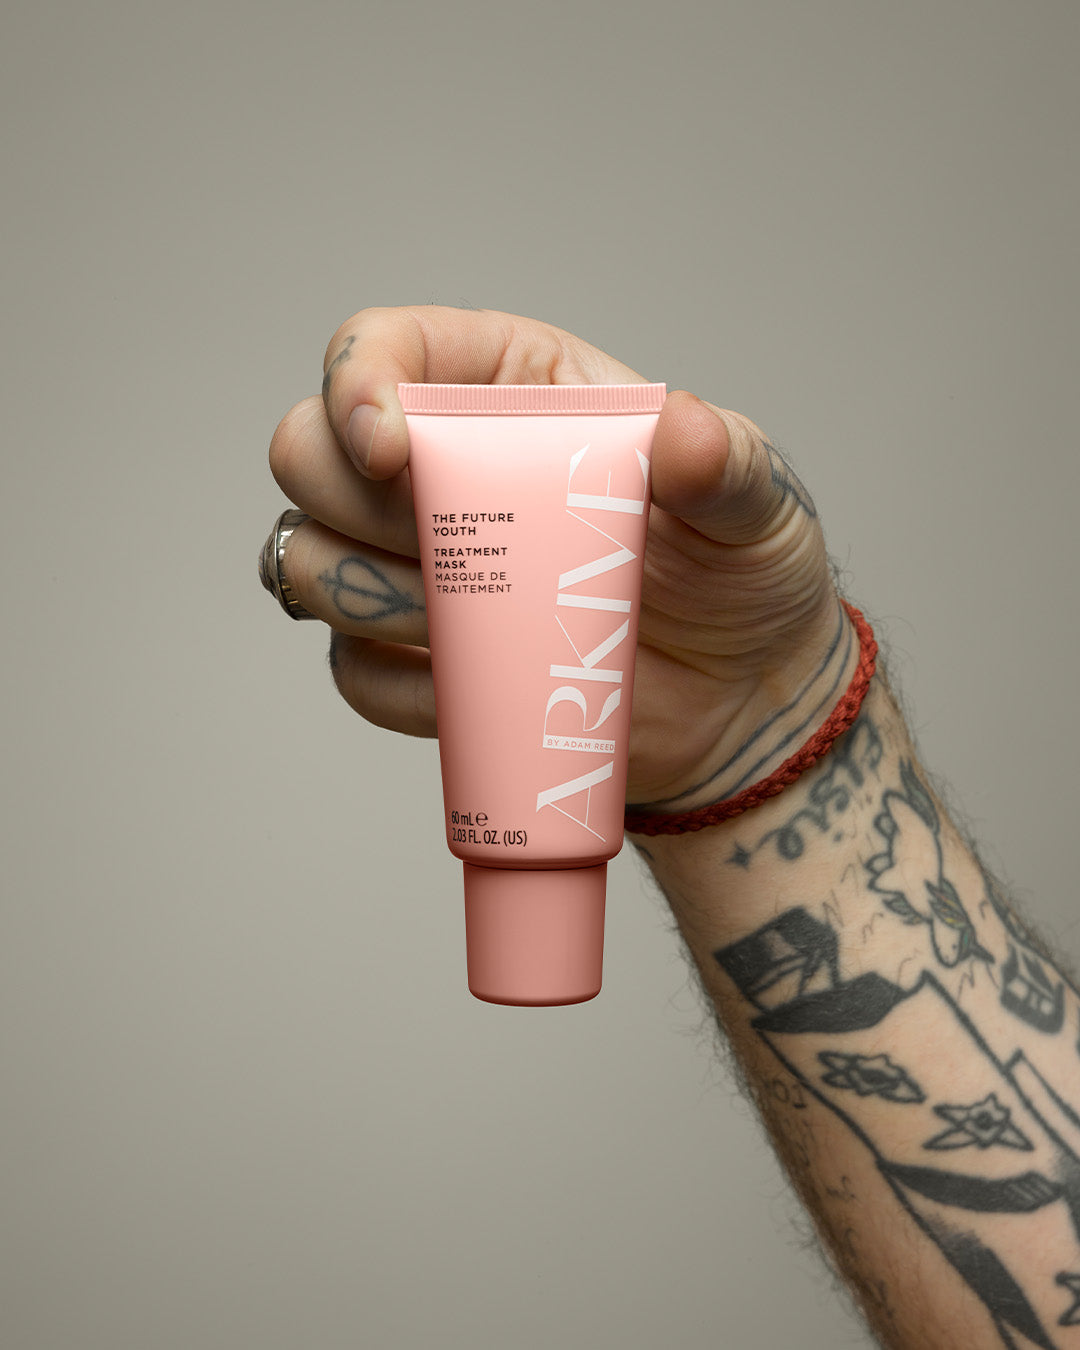 A 60ml mini bottle of Arkive's The Future Youth hair treatment mask held in the hand